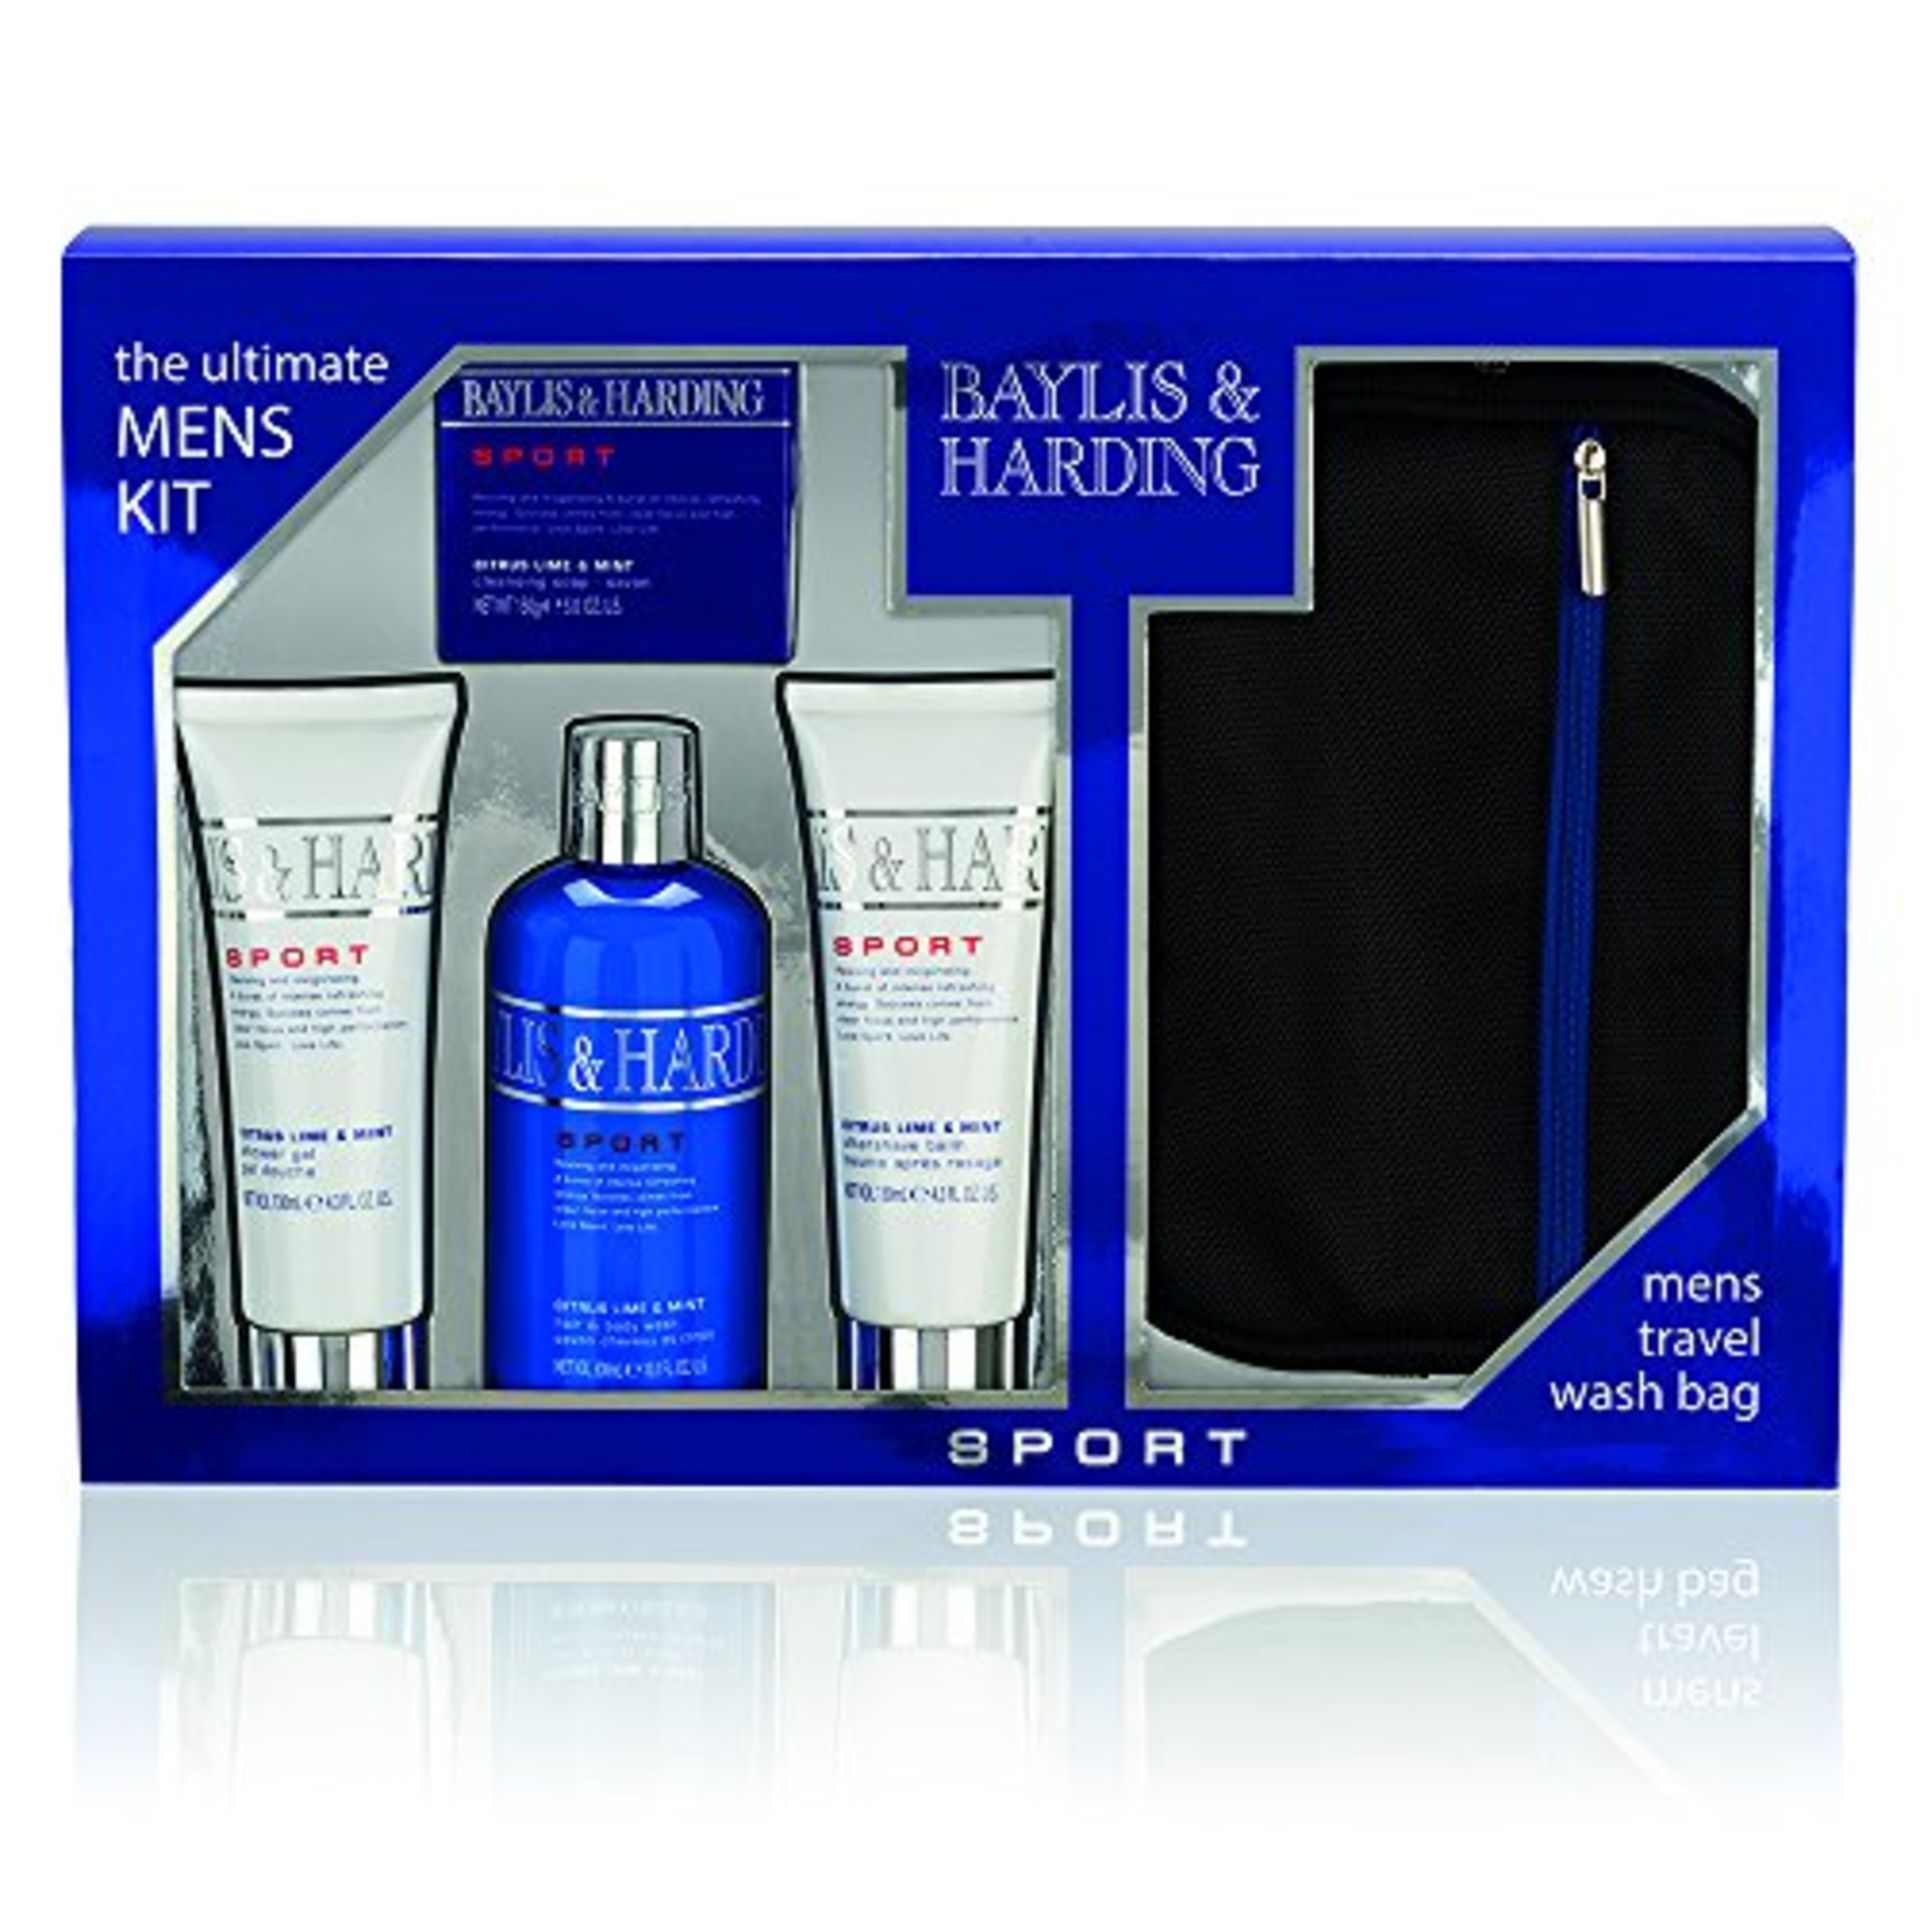 V Brand New Baylis and Harding The Ultimate Men's Kit Including 1 x 300ml Hair and Body Wash 1 x